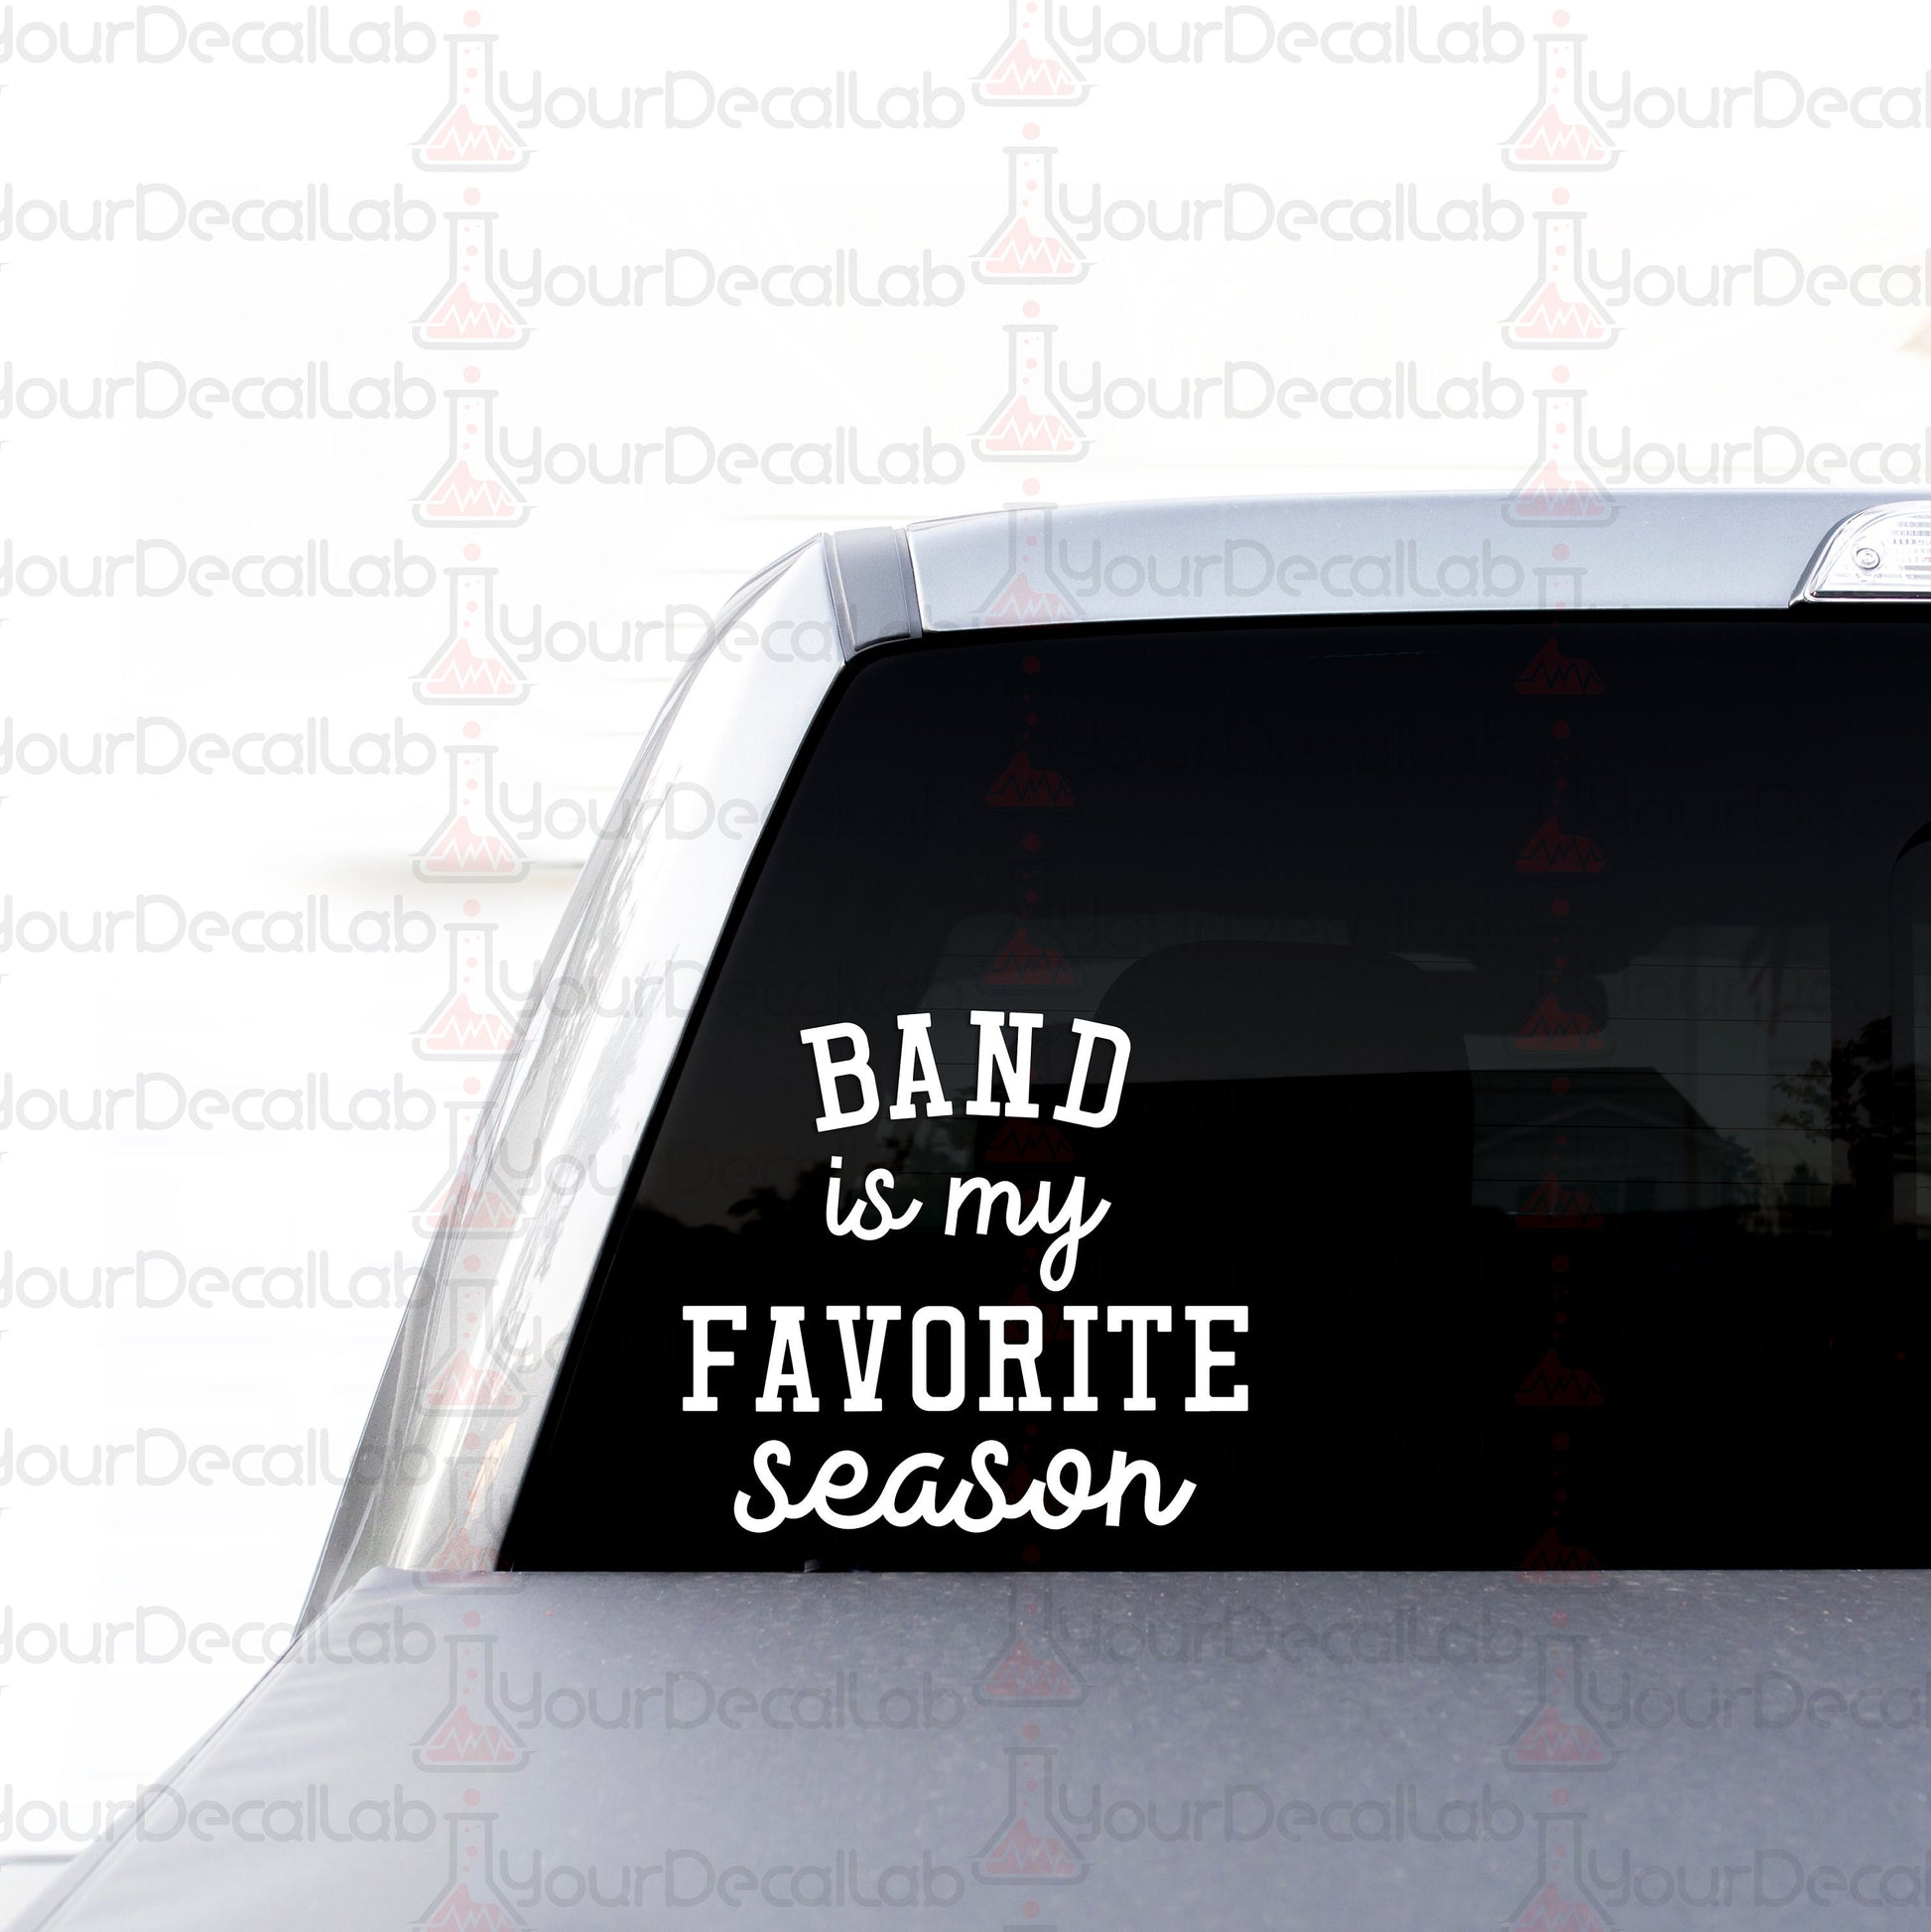 a sticker that says band is my favorite season